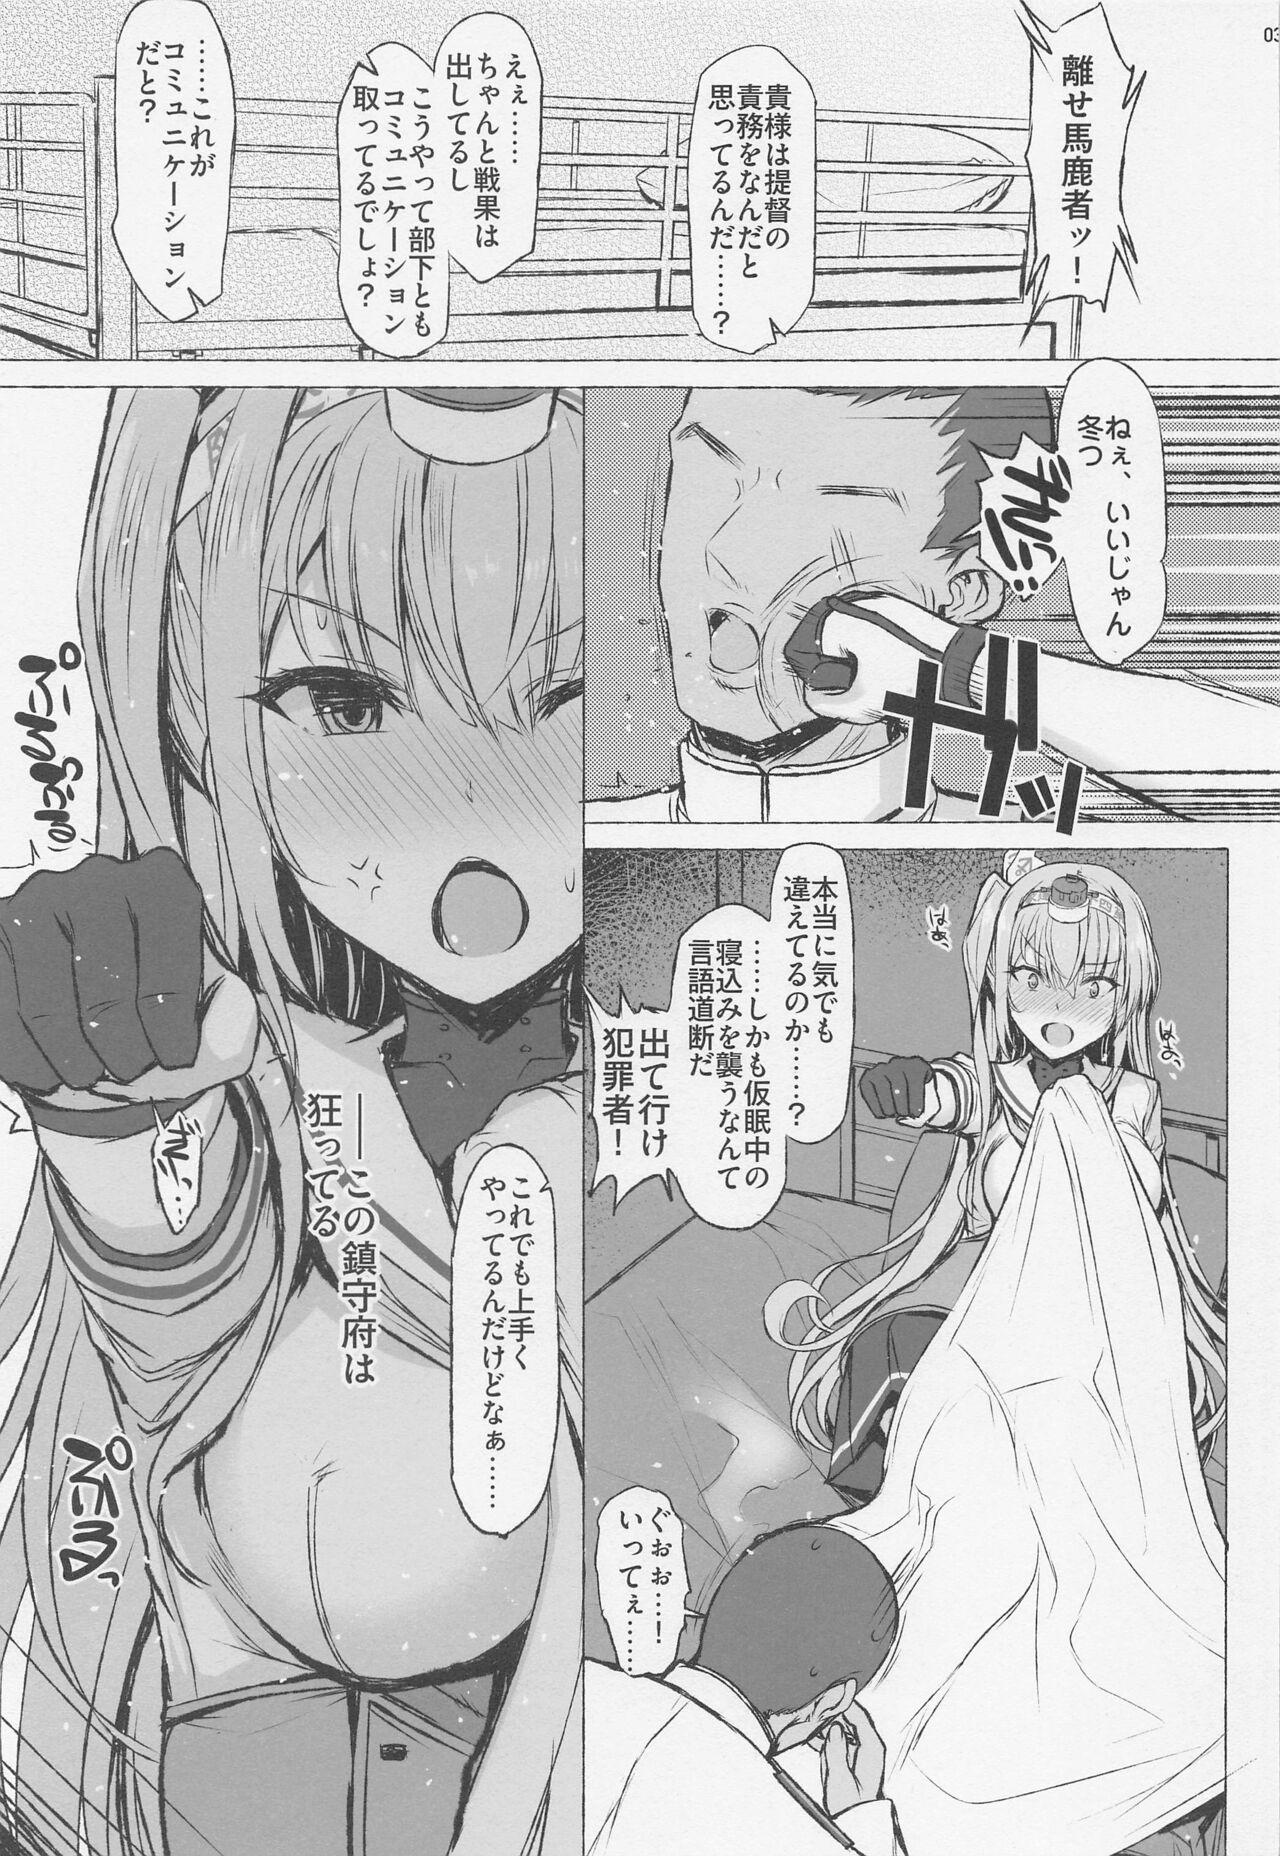 College AIN'T NO WAY - Kantai collection Argentina - Page 2